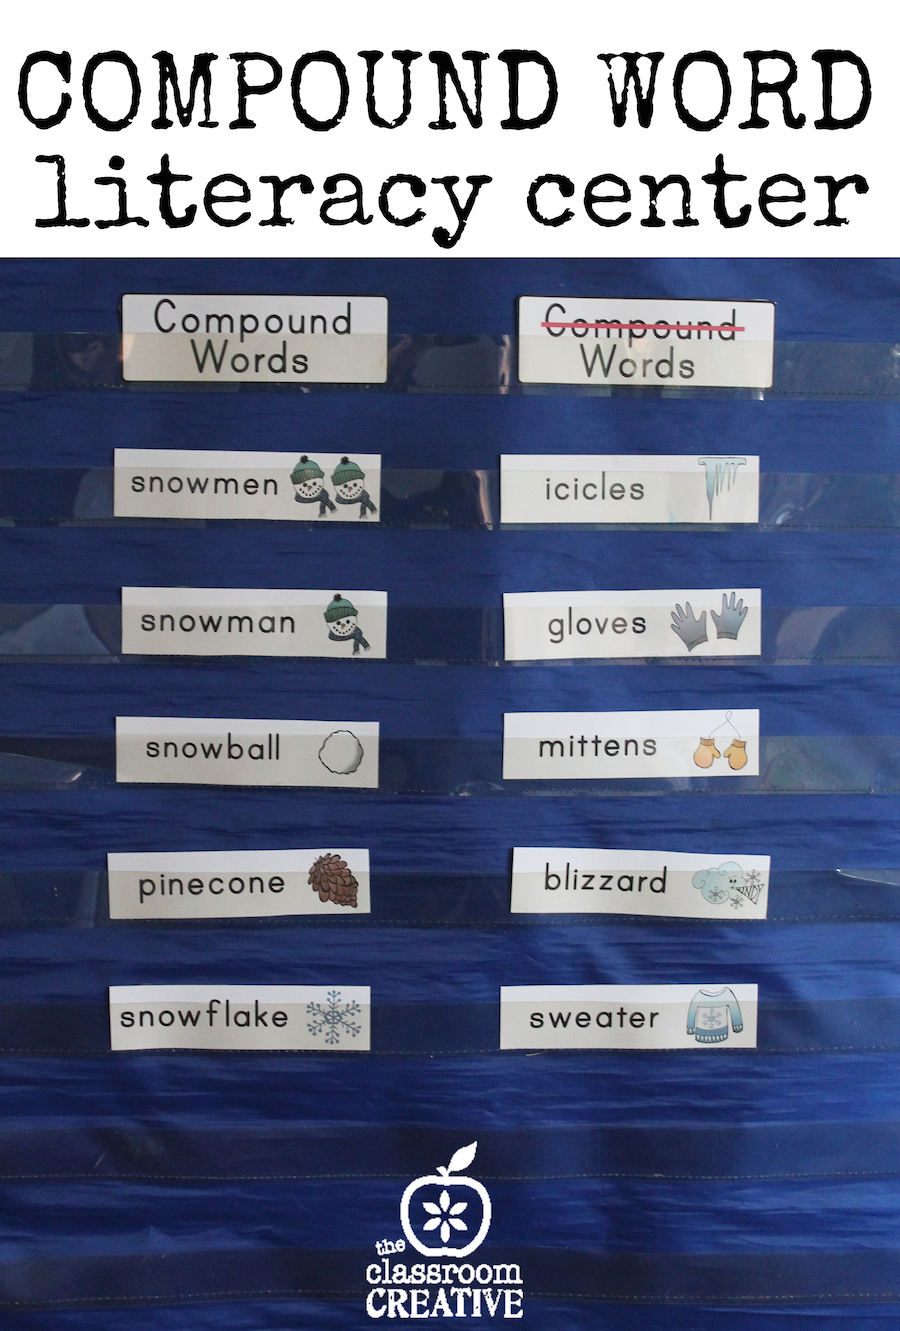 compound word literacy center theclassroomcreative